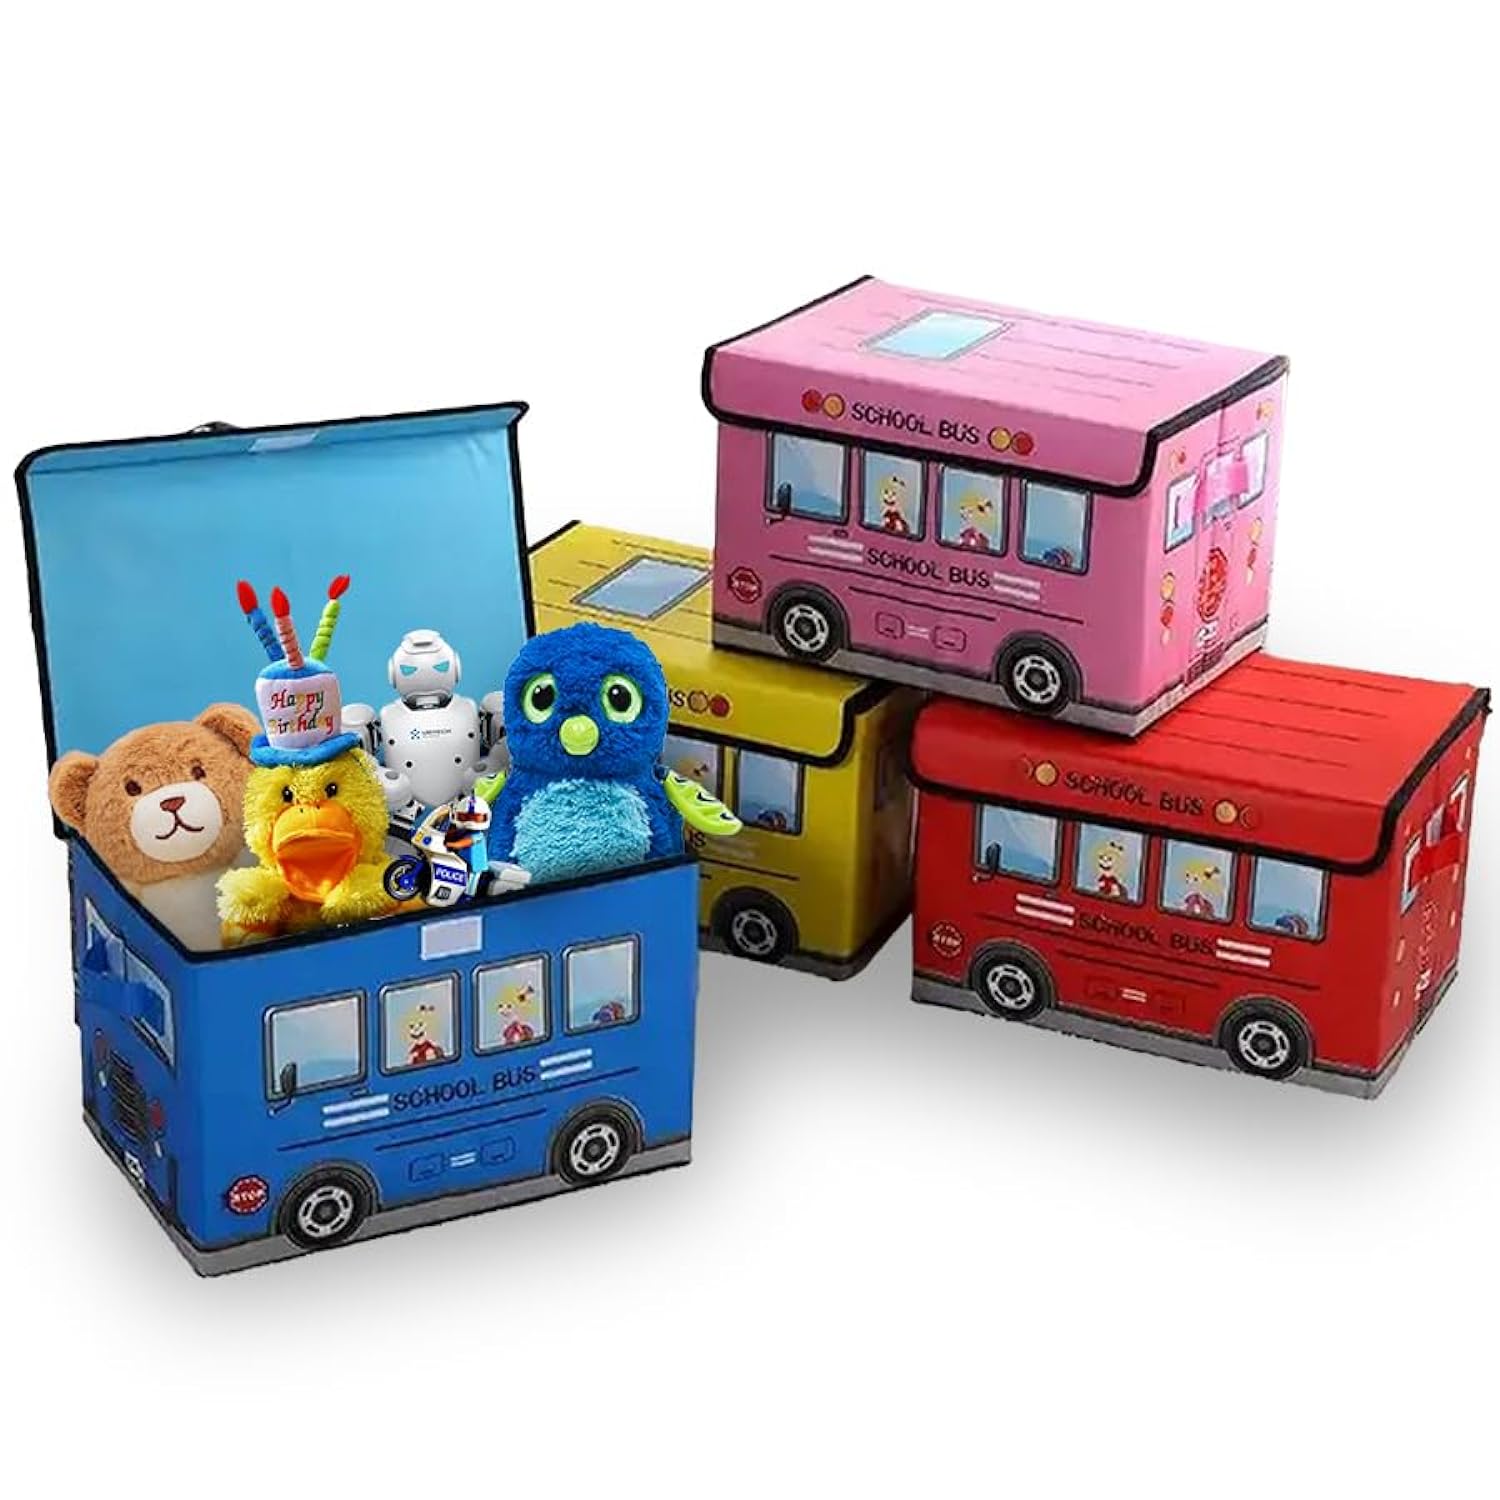 Great Choice Products Bus Storage Box For Kids, Foldable Toy Boxes Books, Children'S Toy Bin With Lids, School Design For Boys And Girls, Mult…